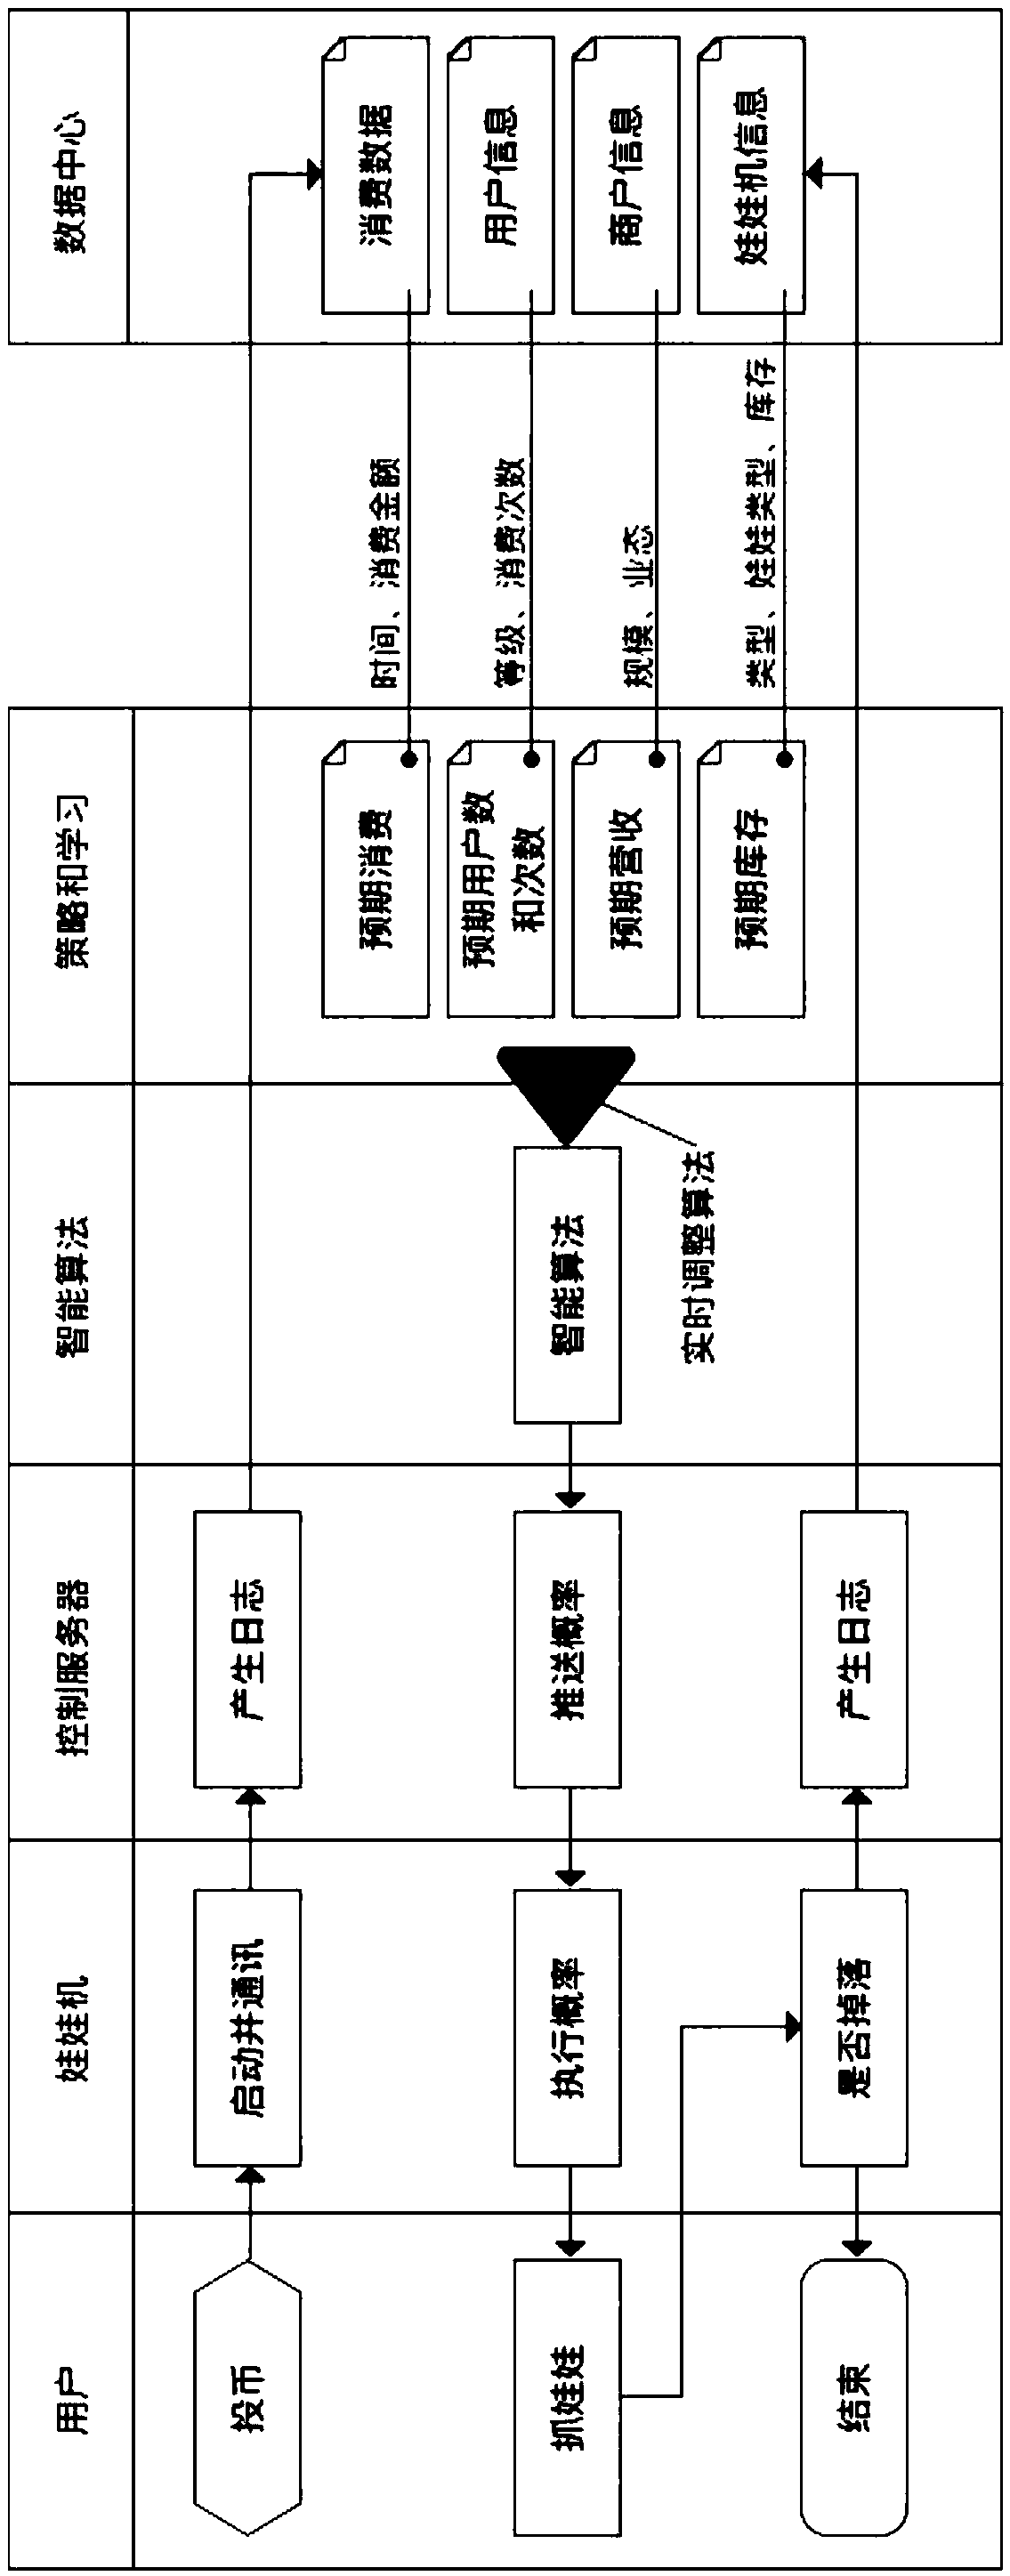 Control method for controlling grabbing success rate of doll catcher